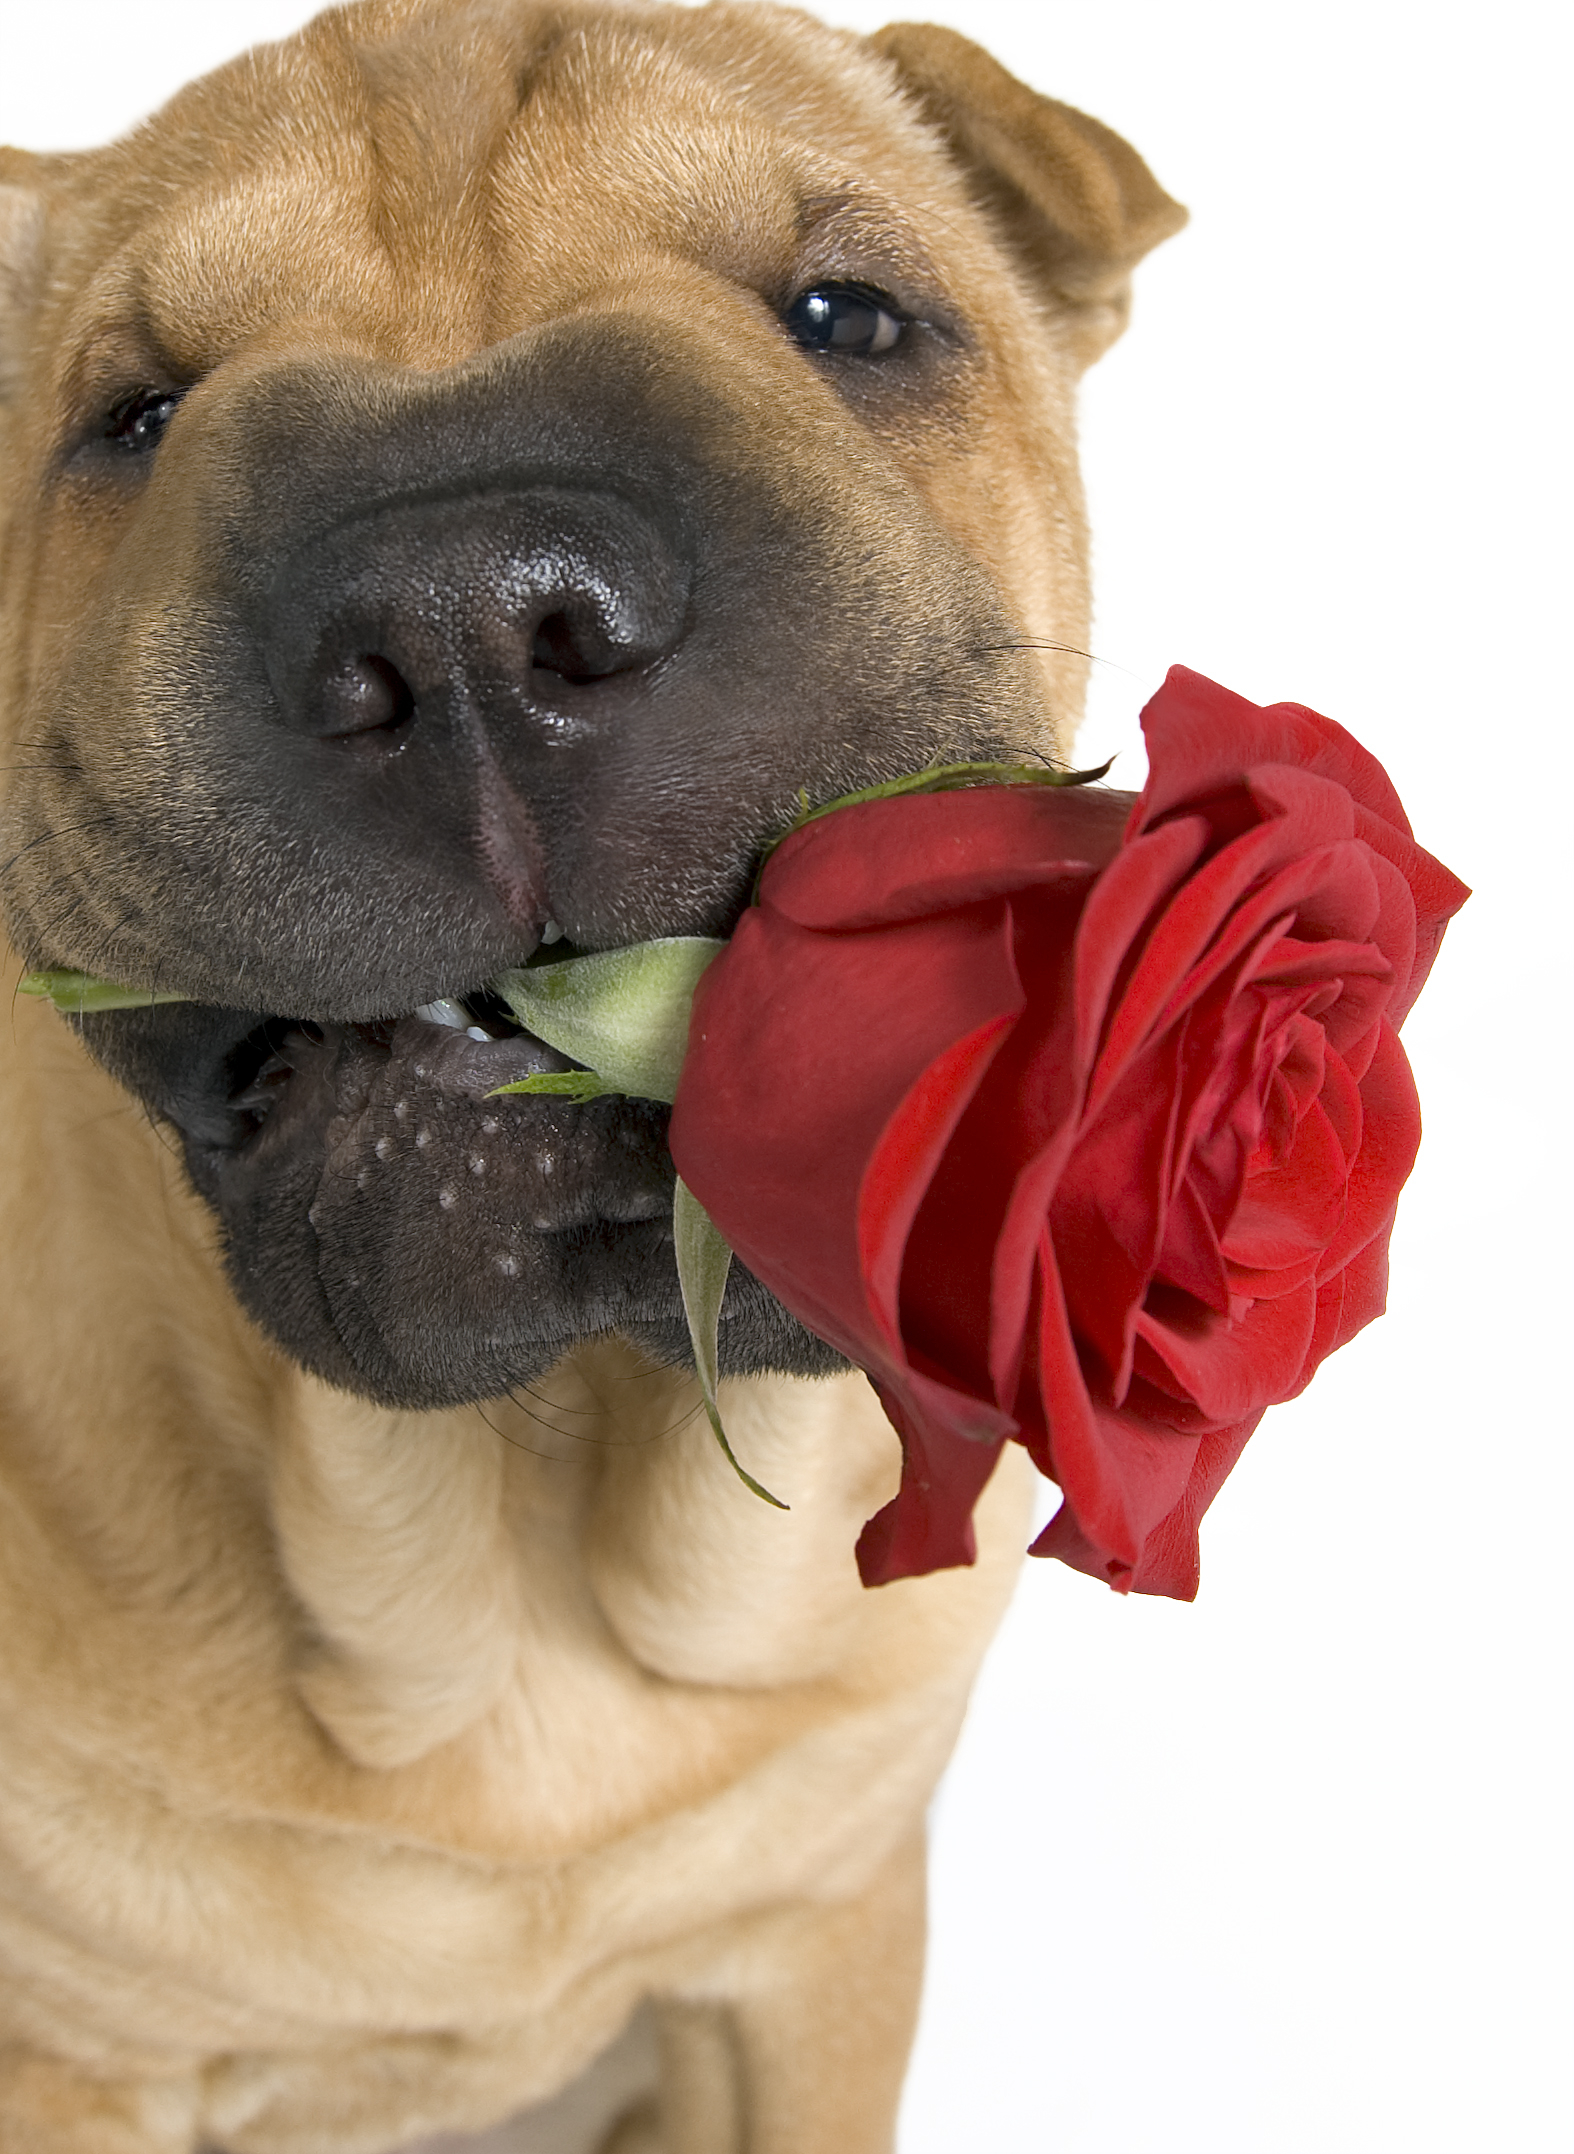 Shar Pei Dog With Cute Rose Wallpaper Valentines Day Dogs